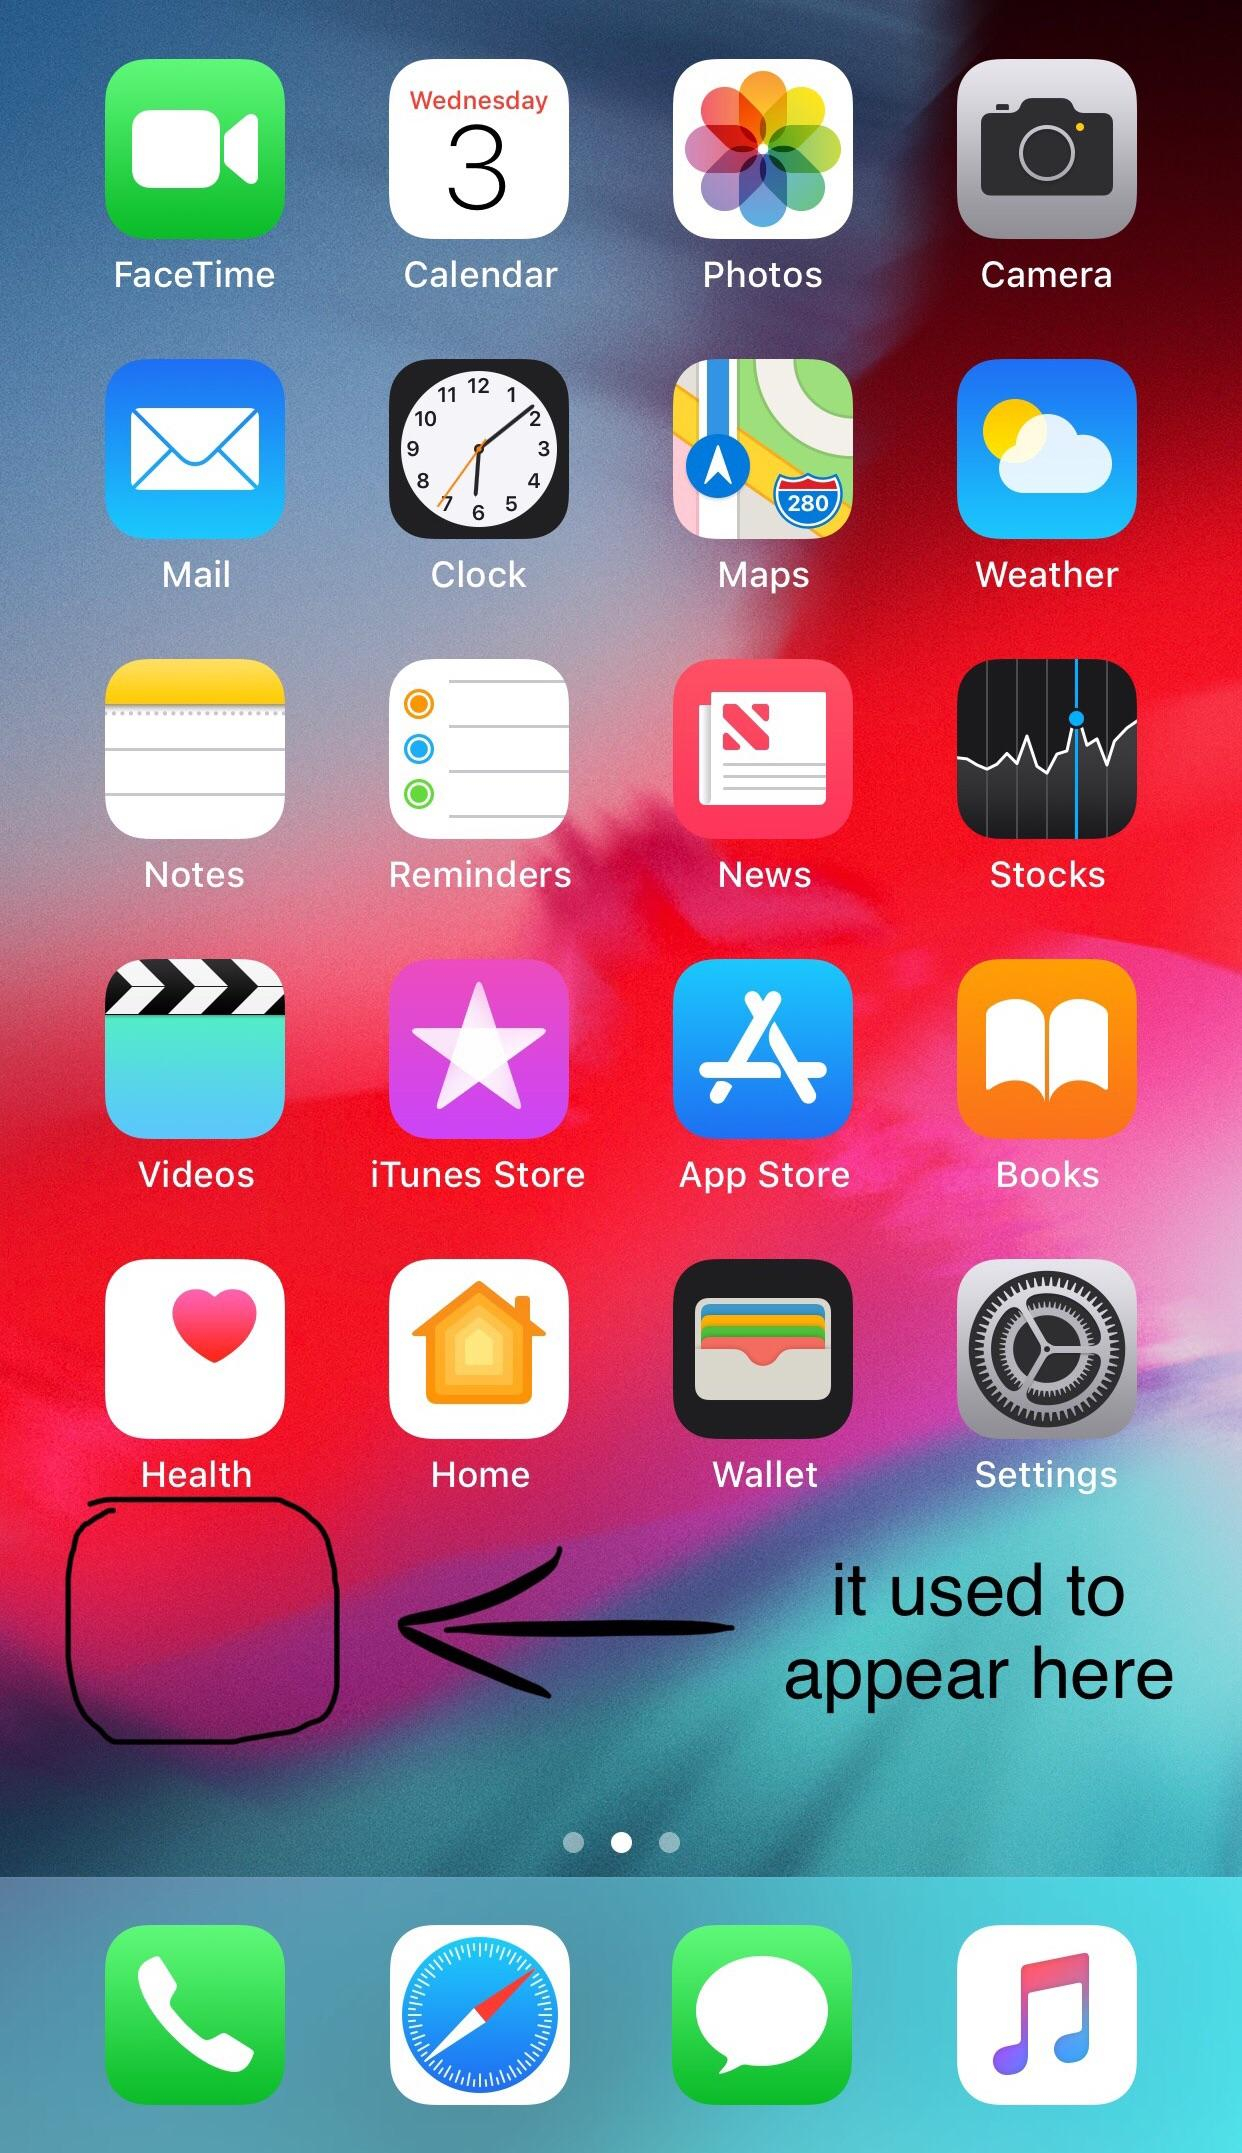 My Iphone 6 Plus Keep Having The Measure App Appear On The pertaining to Calendar Icon Disappeared Iphone